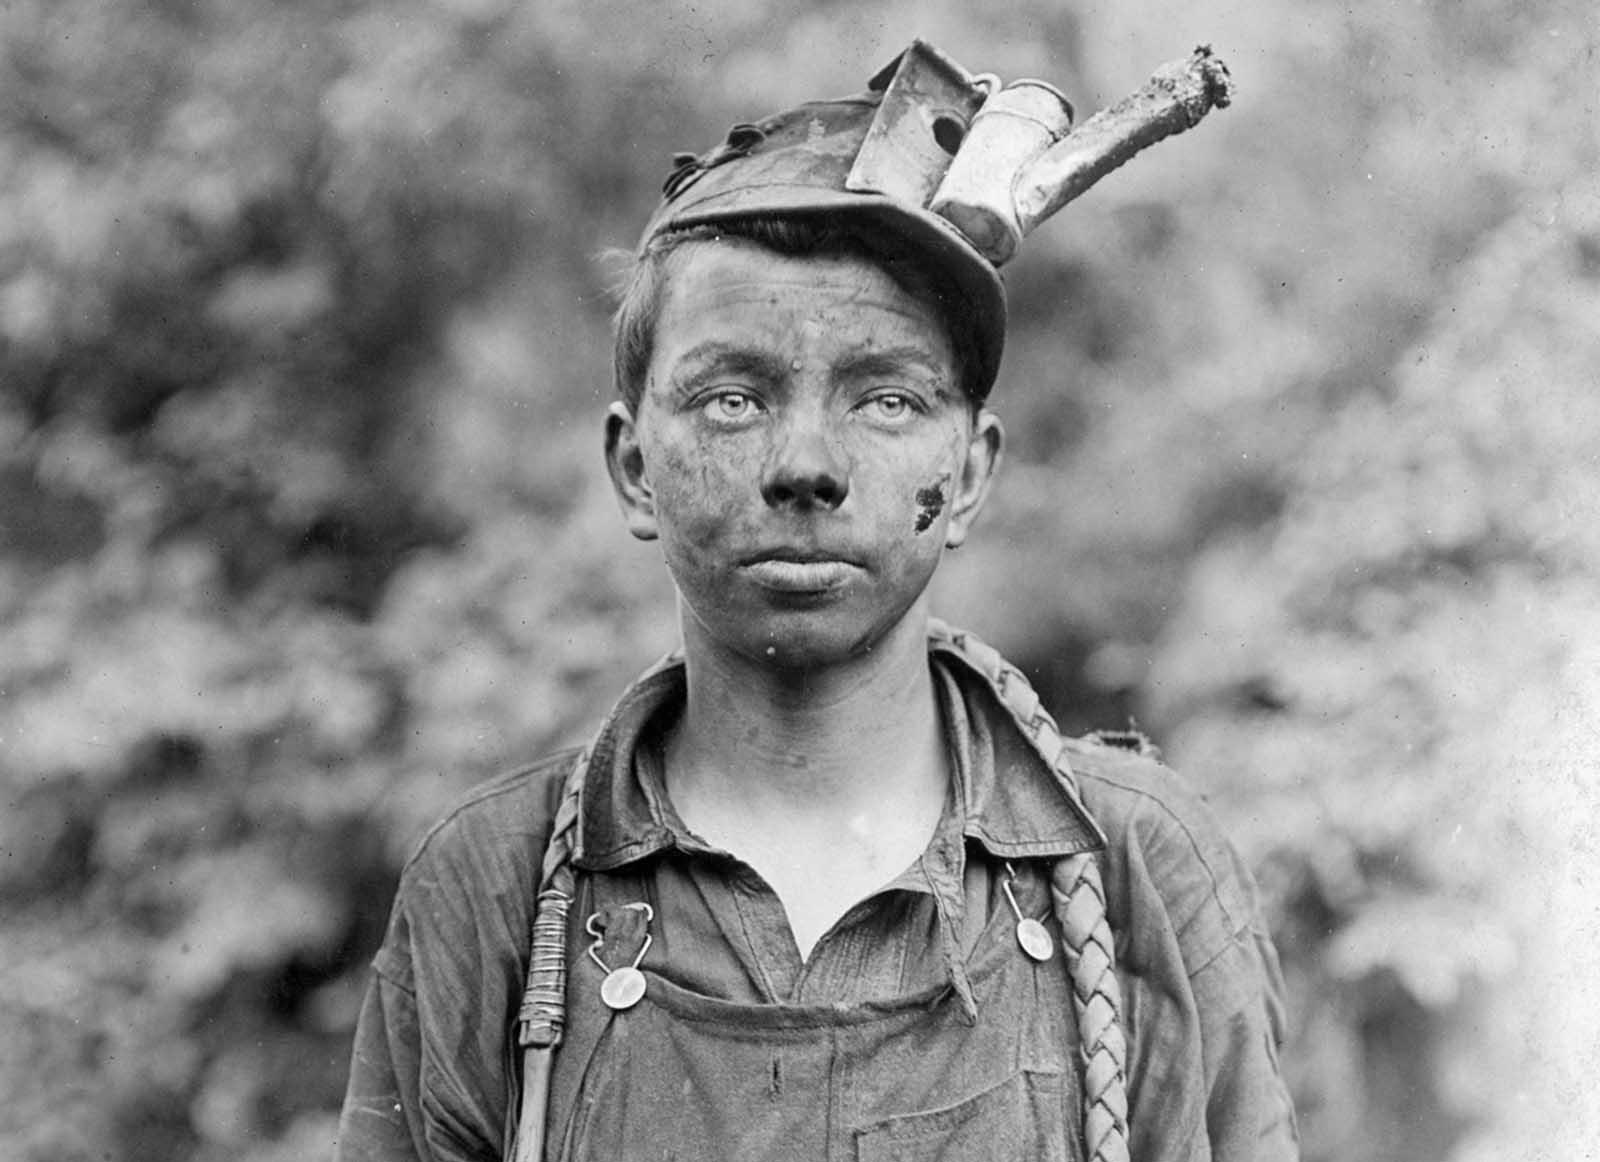 Child Labor In America As Photographed By Lewis Hine